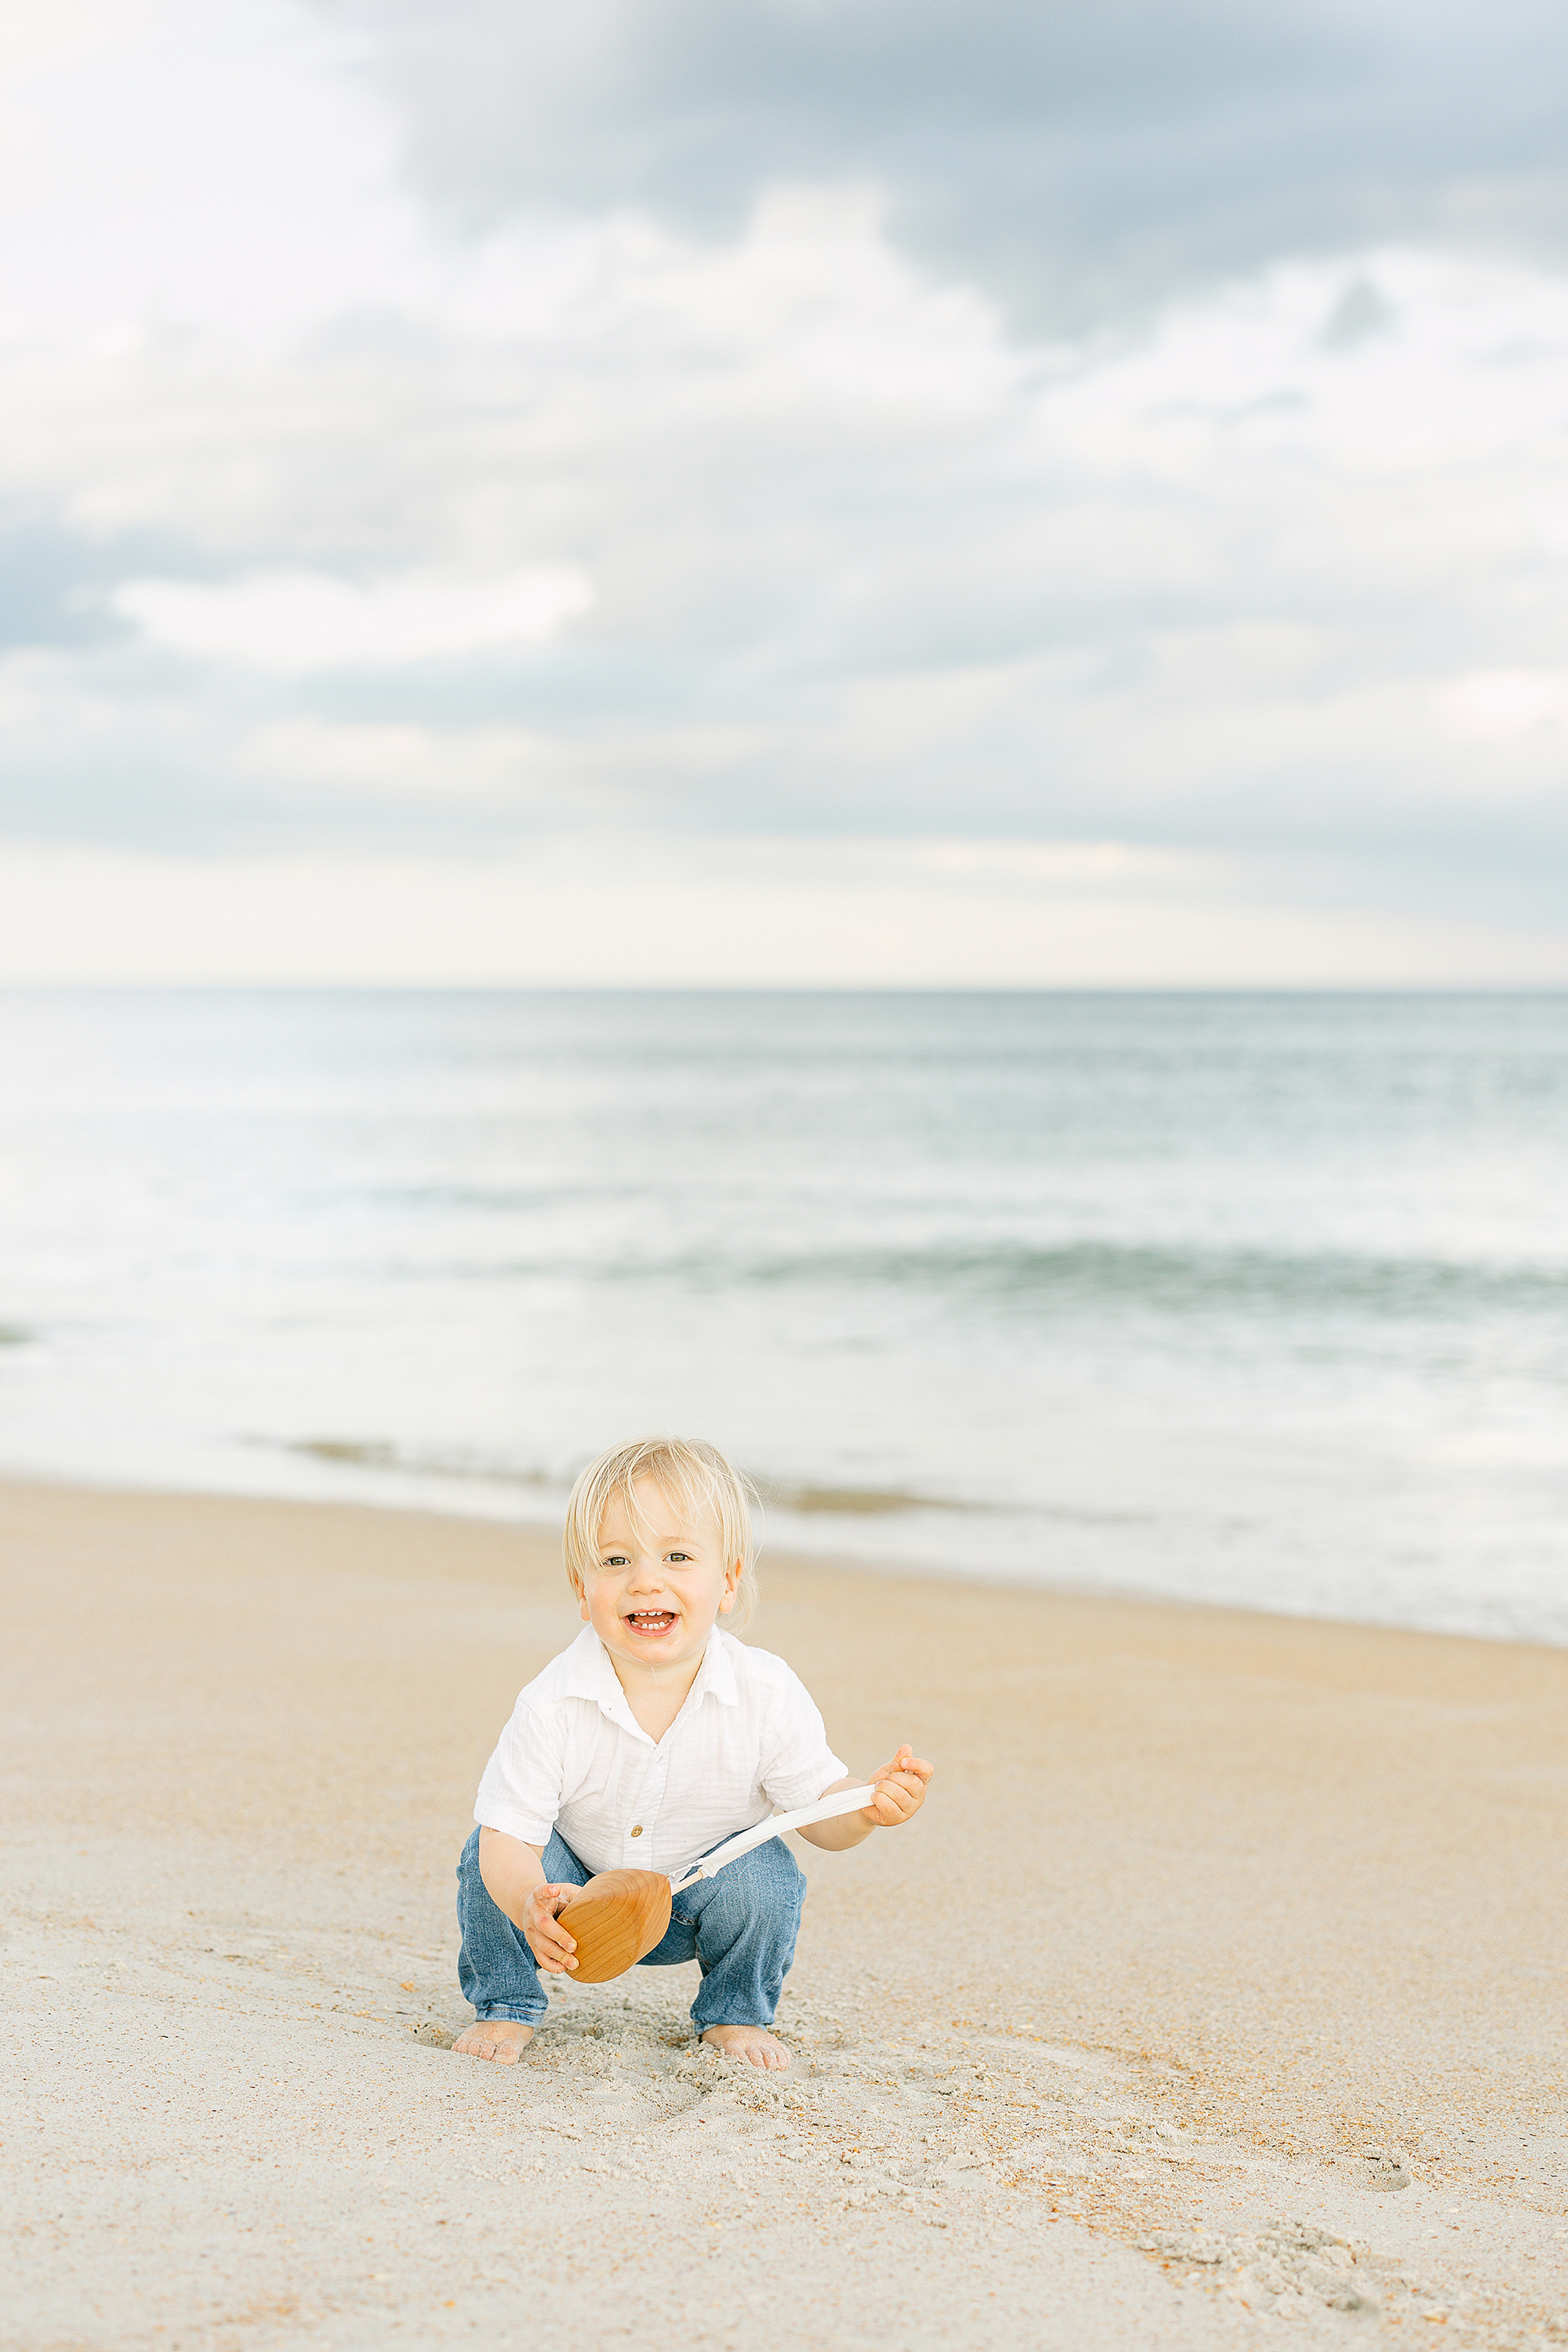 A little baby boy with blond hair wearing a white shirt and jeans holds a wooden boat on the beach.